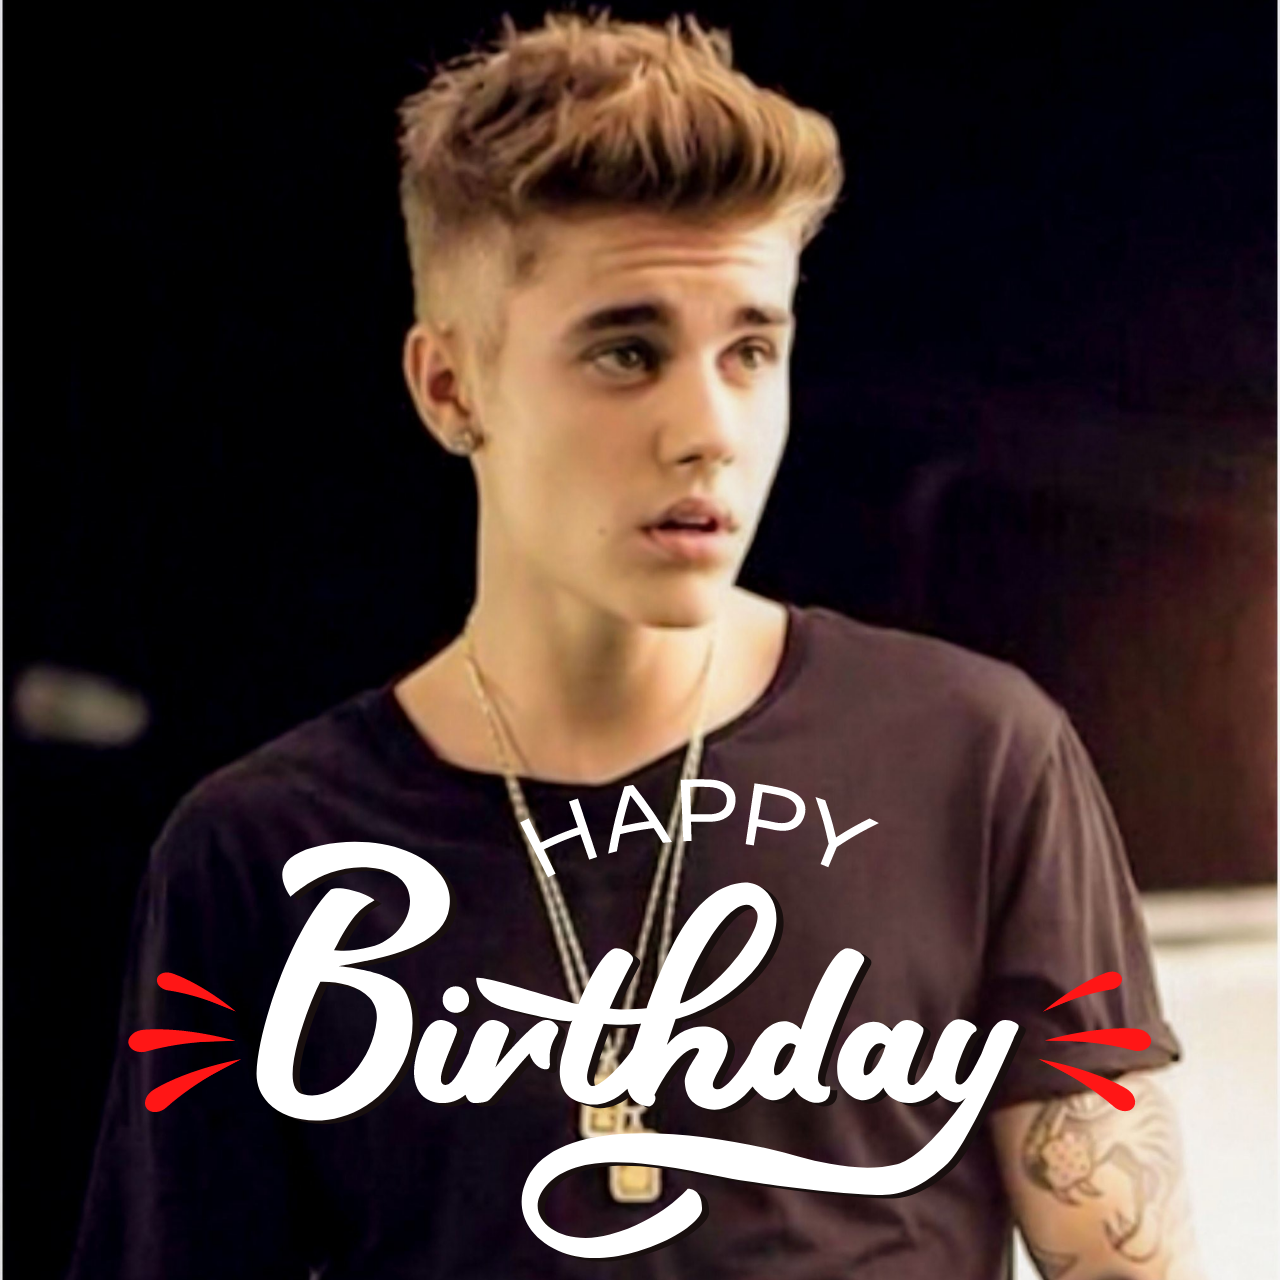 Happy Birthday Justin Bieber: Wishes, HD Images, Messages, Greetings to greet JB